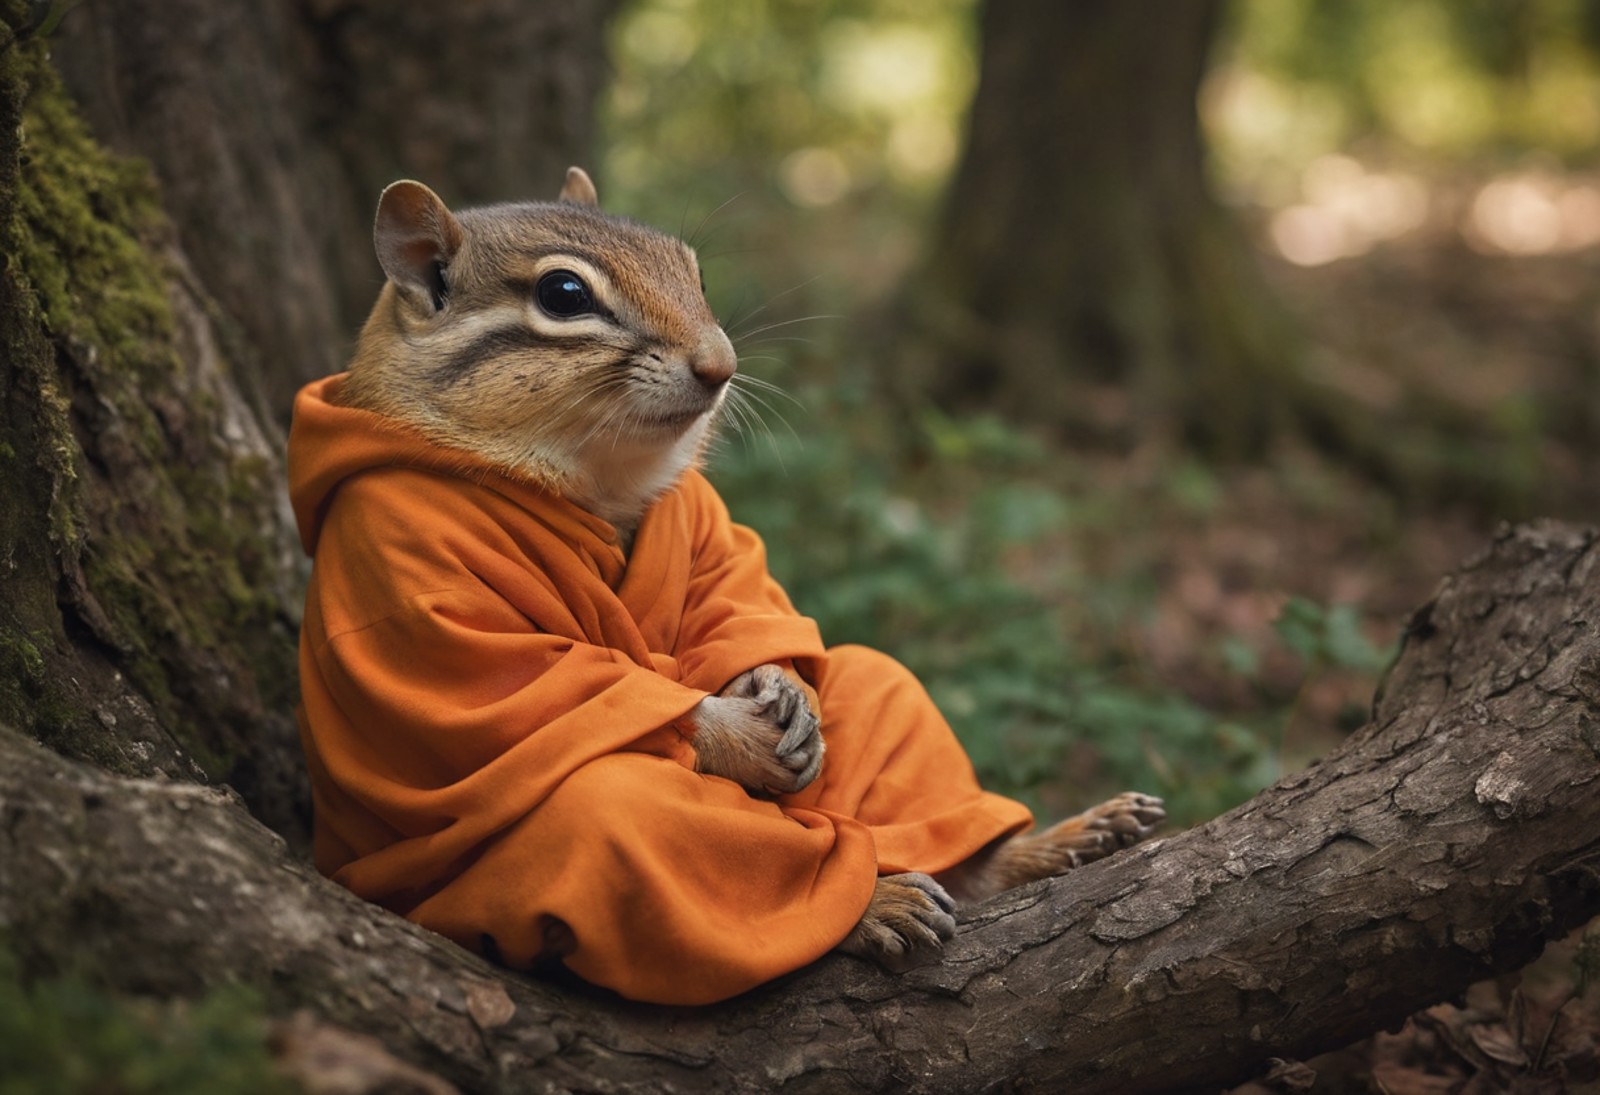 A serene portrait photograph of a chipmunk (monk in orange robe:1.2), embodying tranquility and wisdom amidst nature, remi...